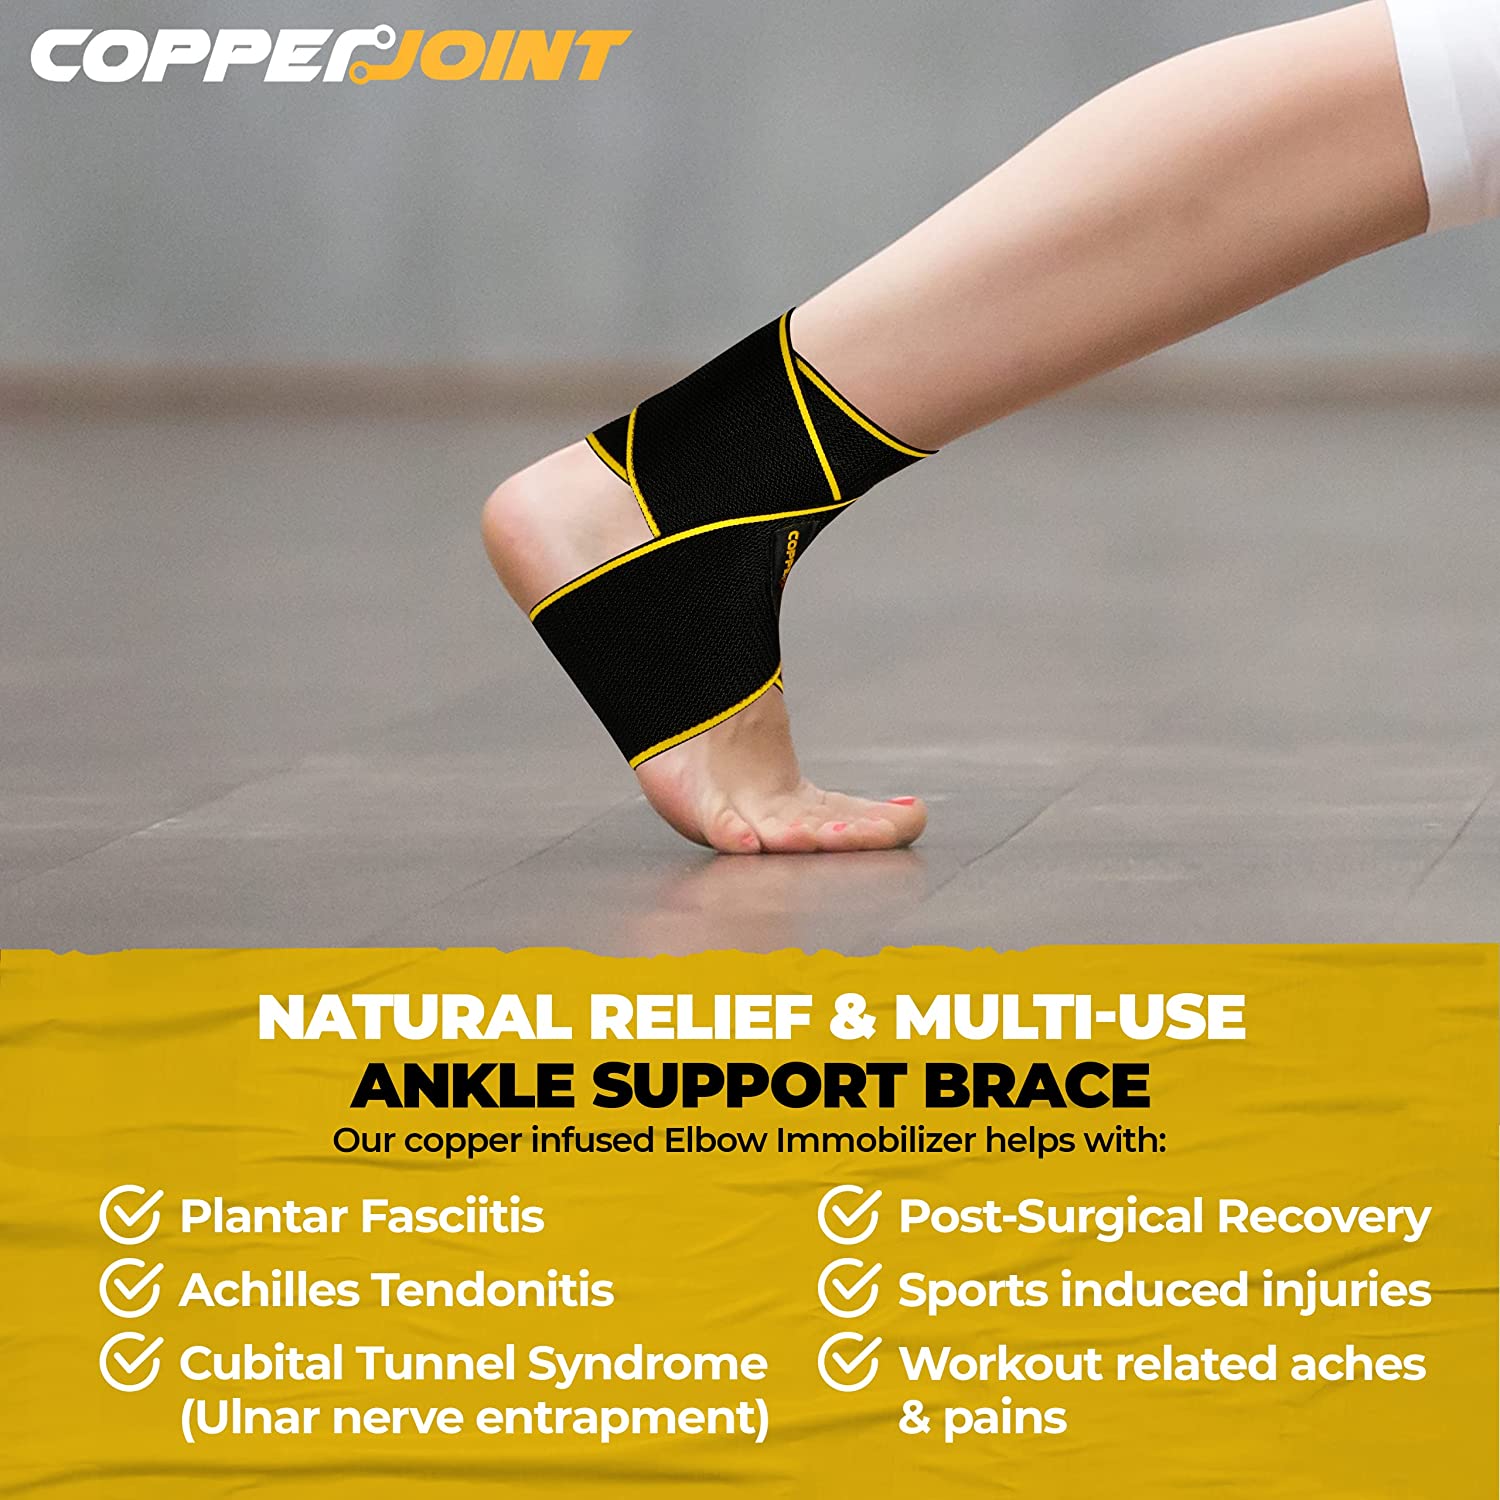 CopperJoint Sprained Ankle Support Launch Ends on a High After Exceptional Sales